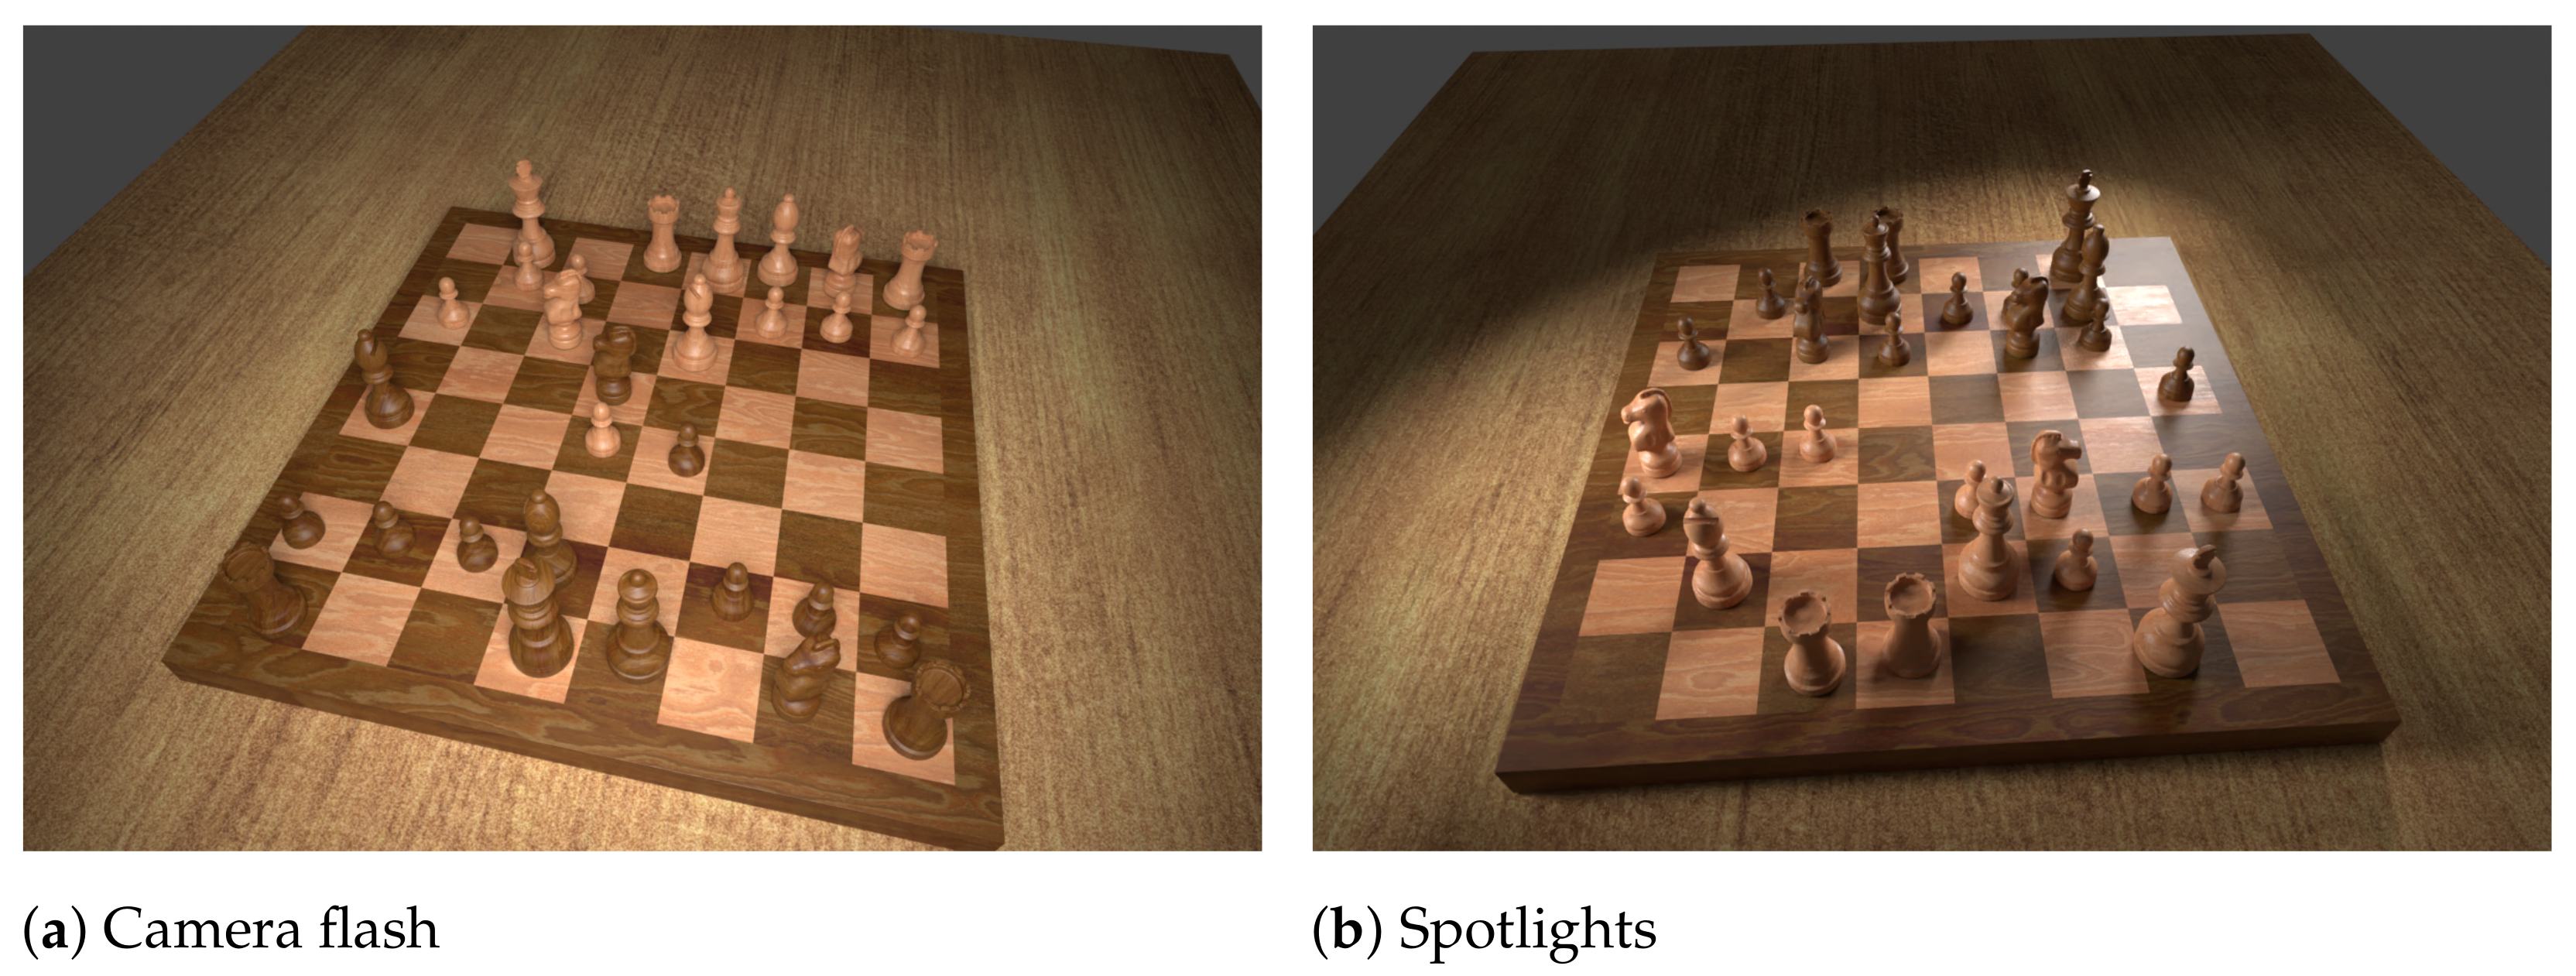 J. Imaging | Free Full-Text | Determining Chess Game State from an Image |  HTML